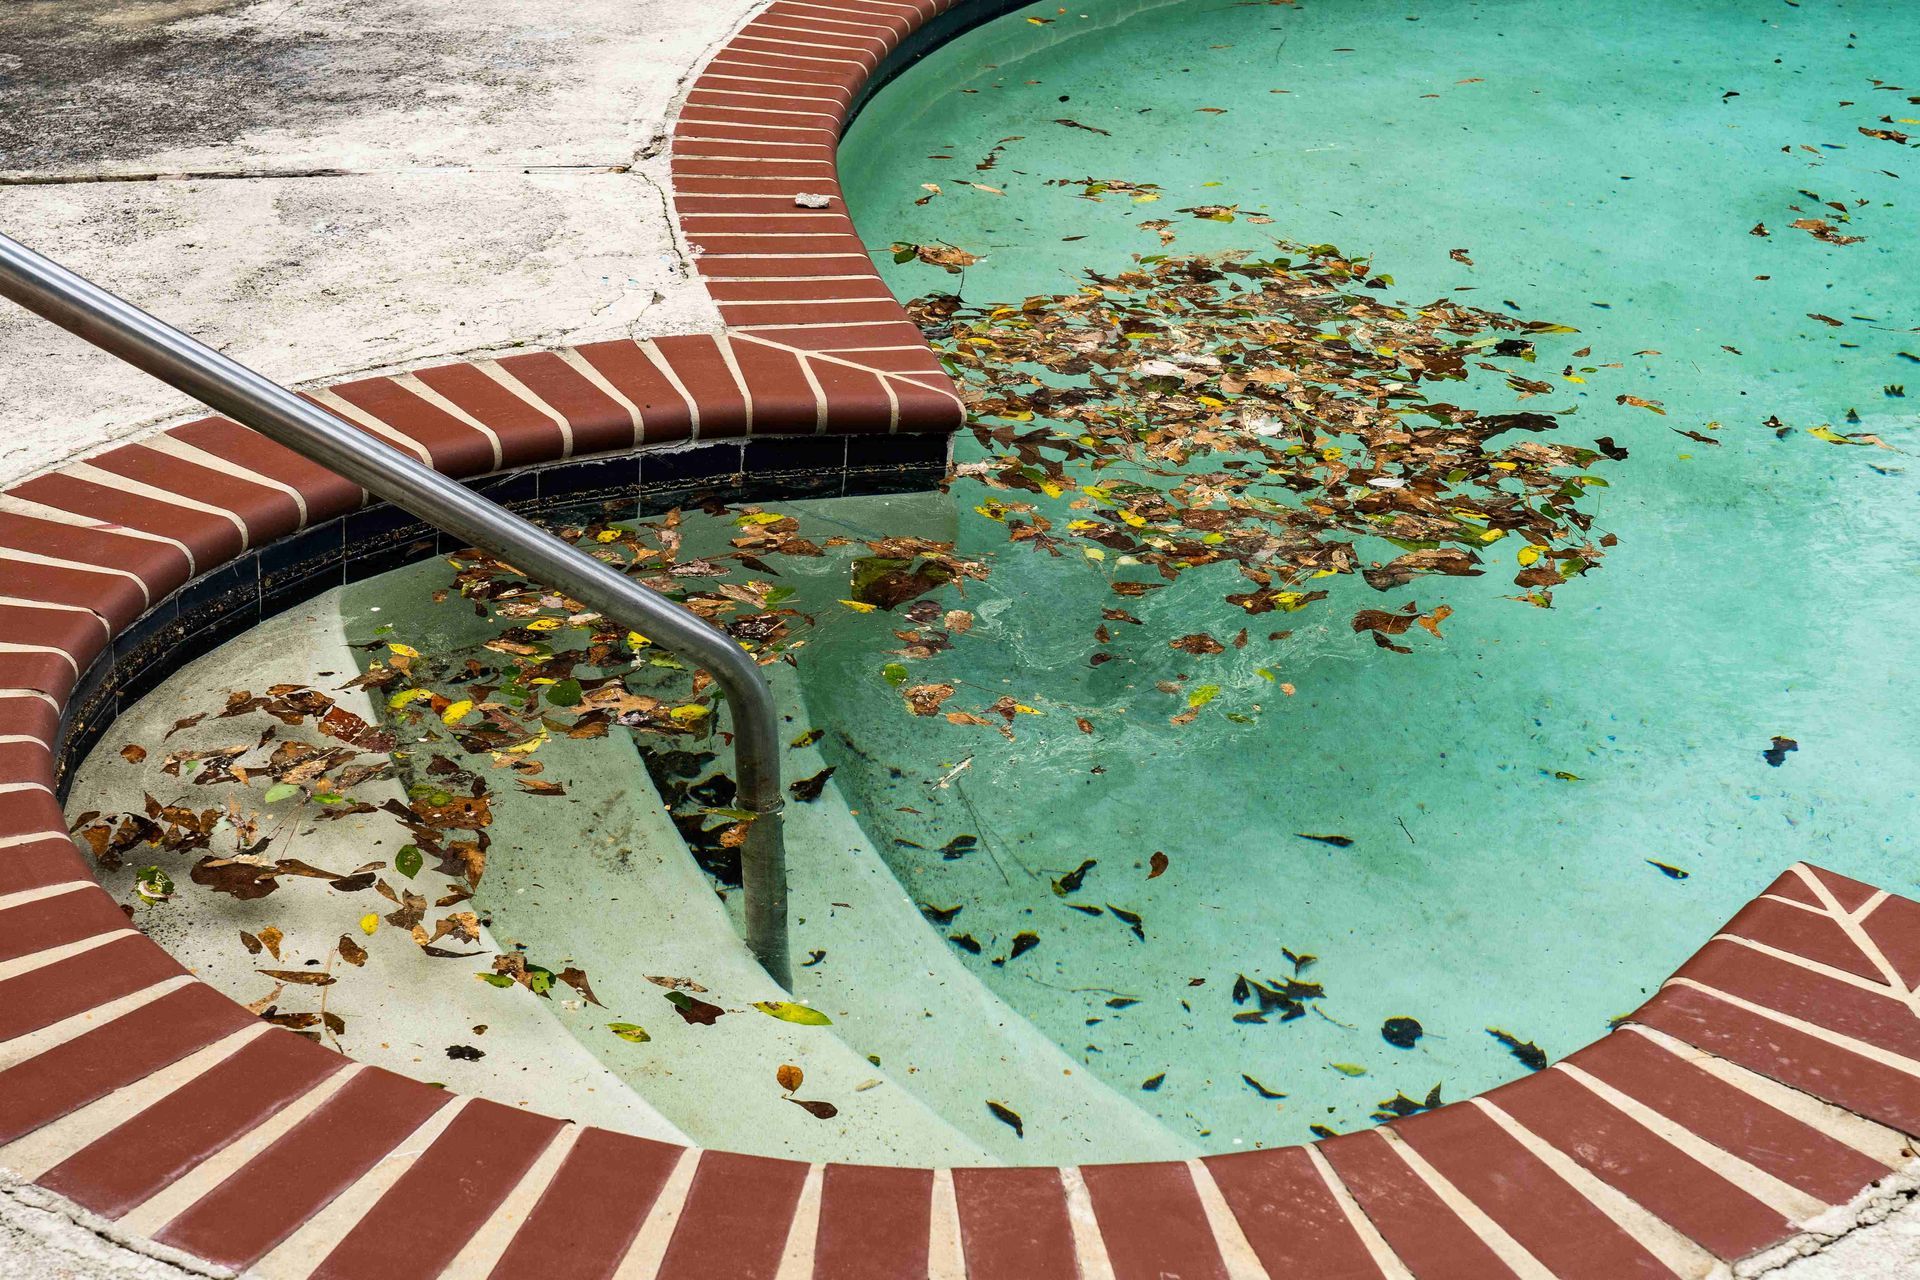 A picture of a bunch of leaves in a pool